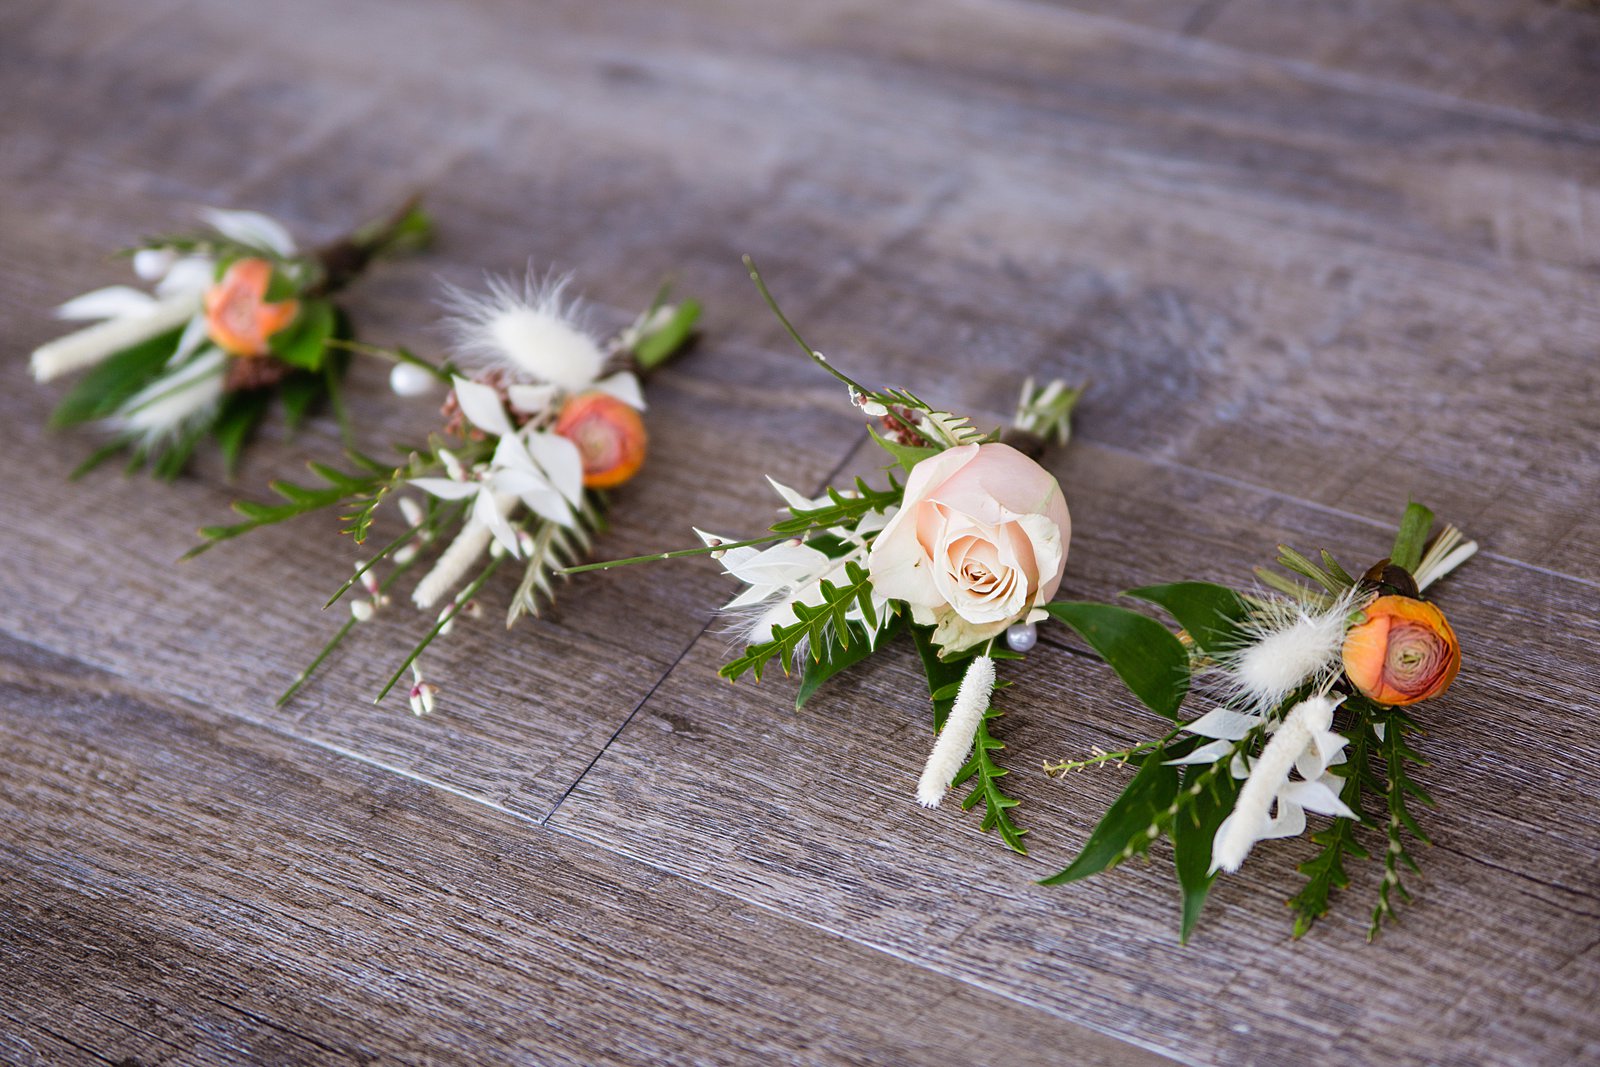 Groom and groomsmen's wild desert inspired peach and cream boutonniere by PMA Photography.